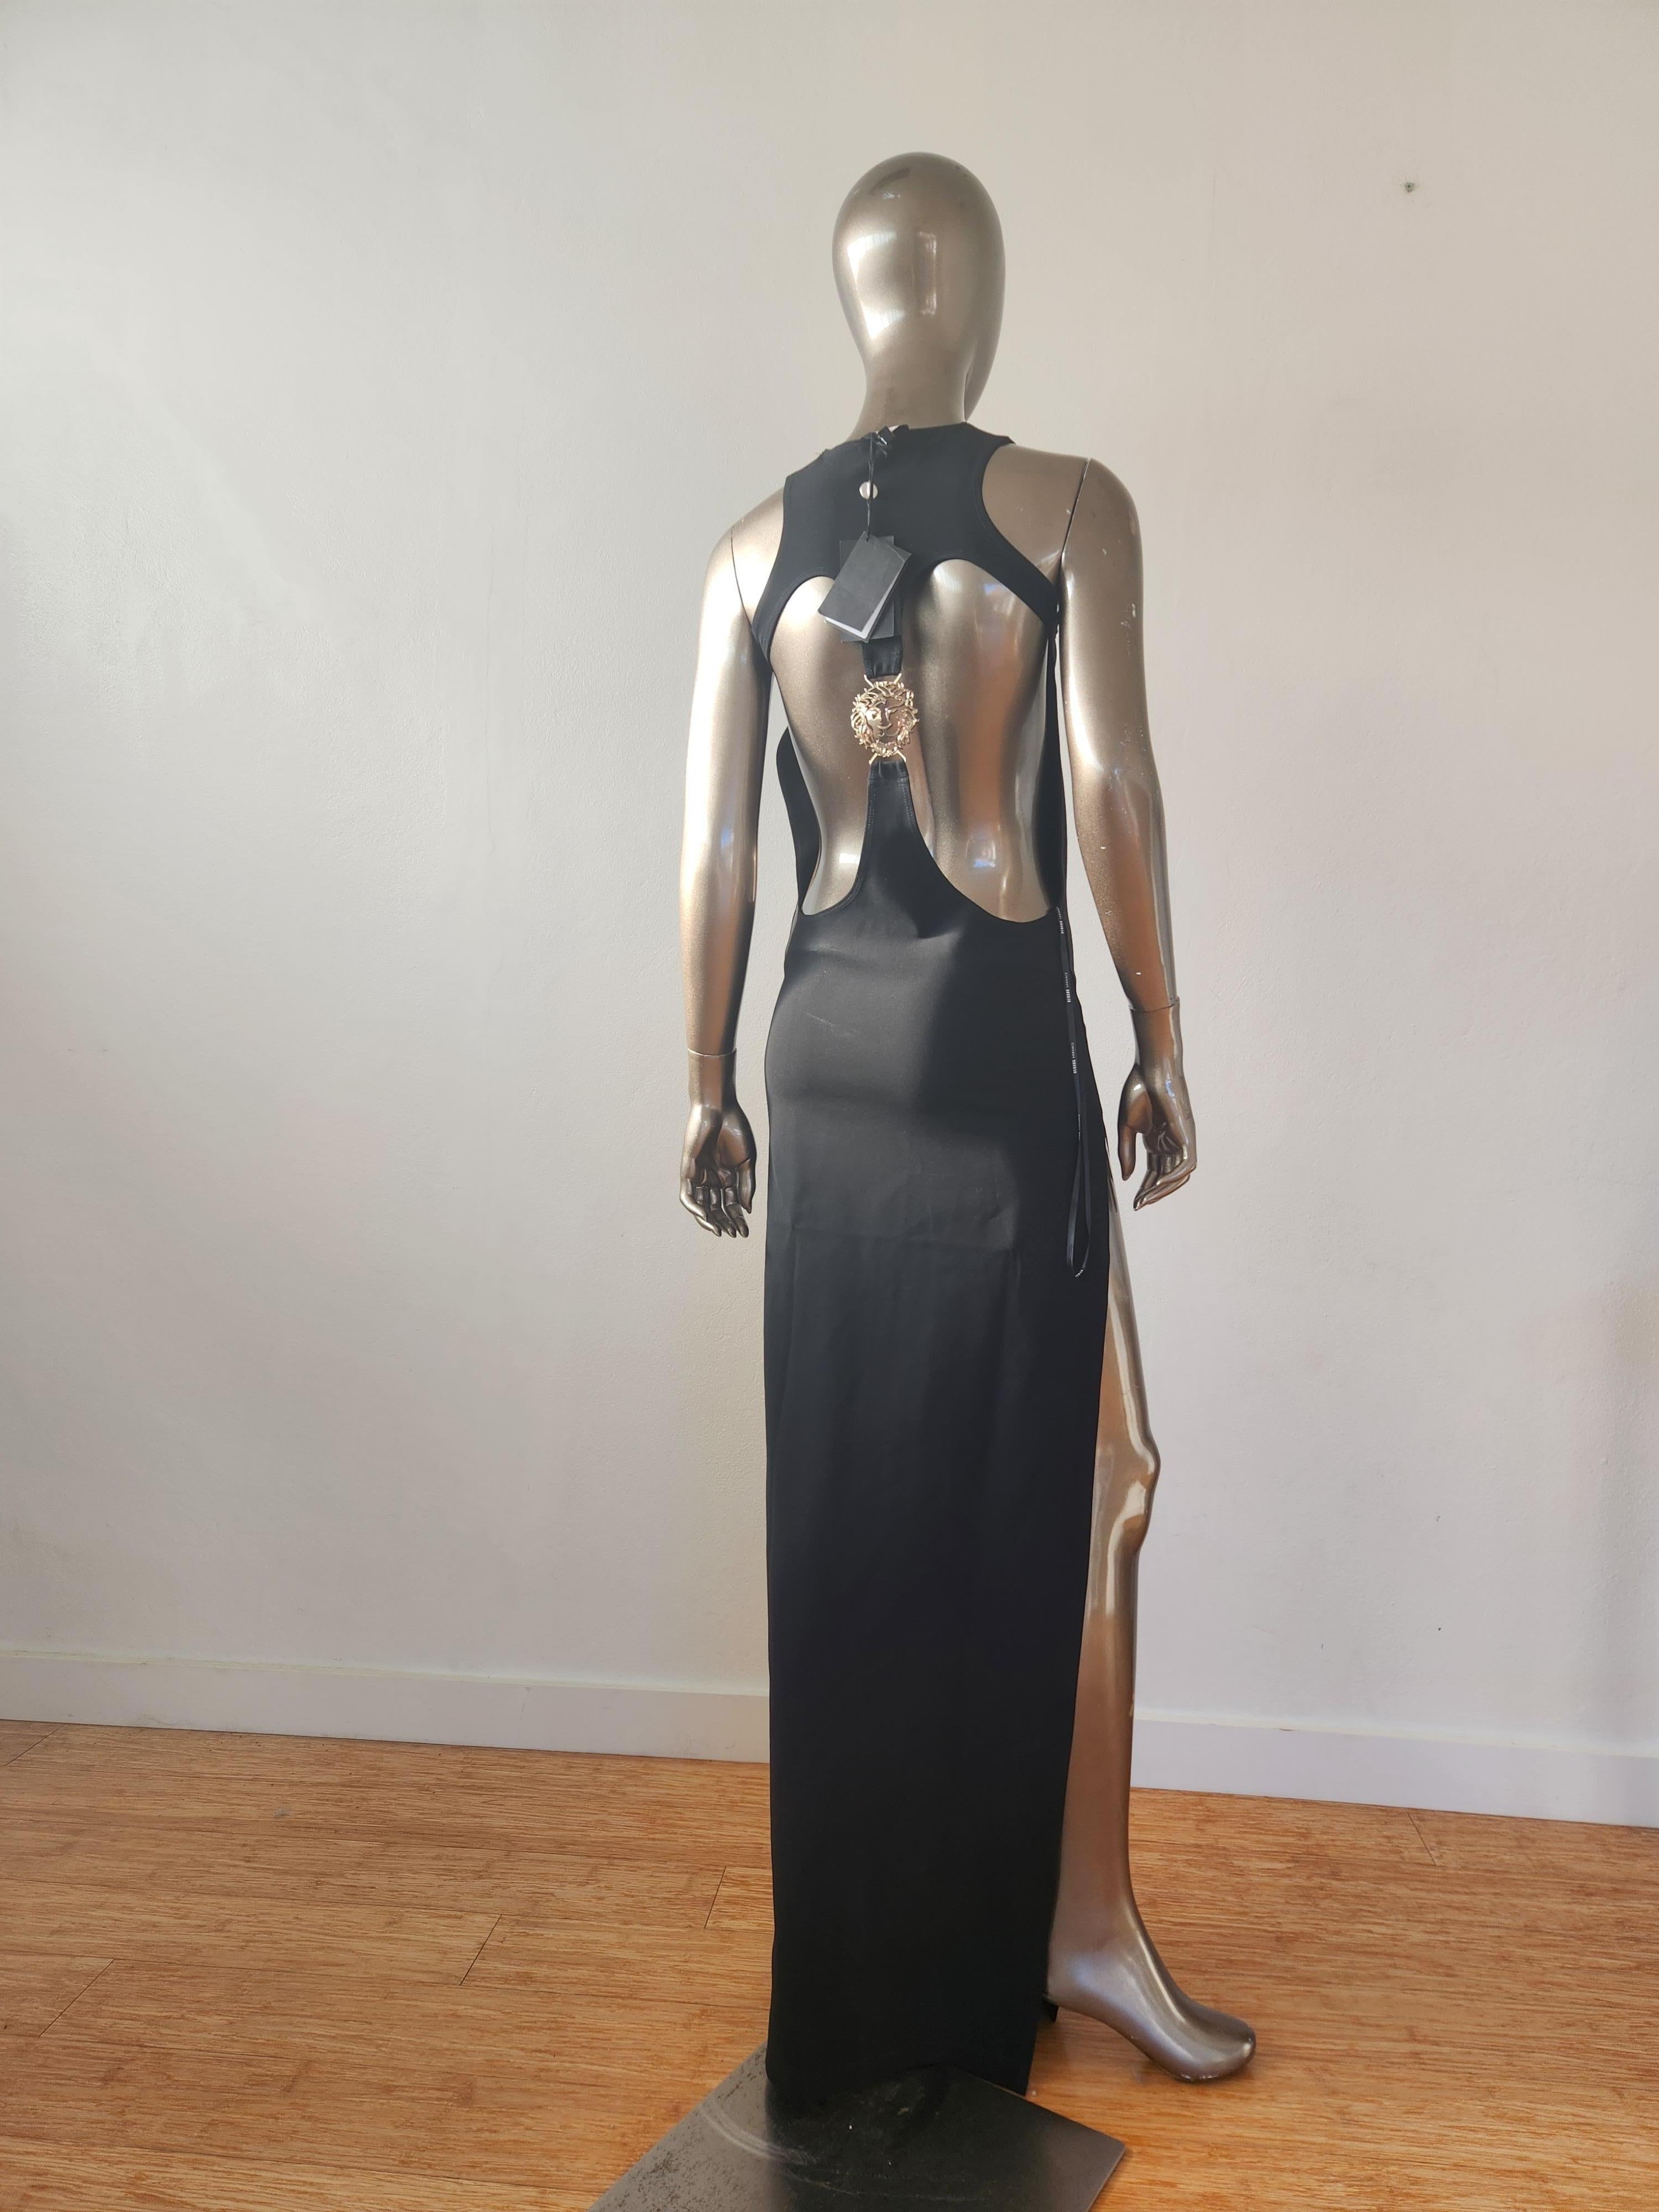 Versus by ANTHONY VACCARELLO

RUNWAY rare sold out backless gown.
Capsule collection with ANTHONY VACCARELLO
A showstopper!

US 4 fits, fits AU 6-8